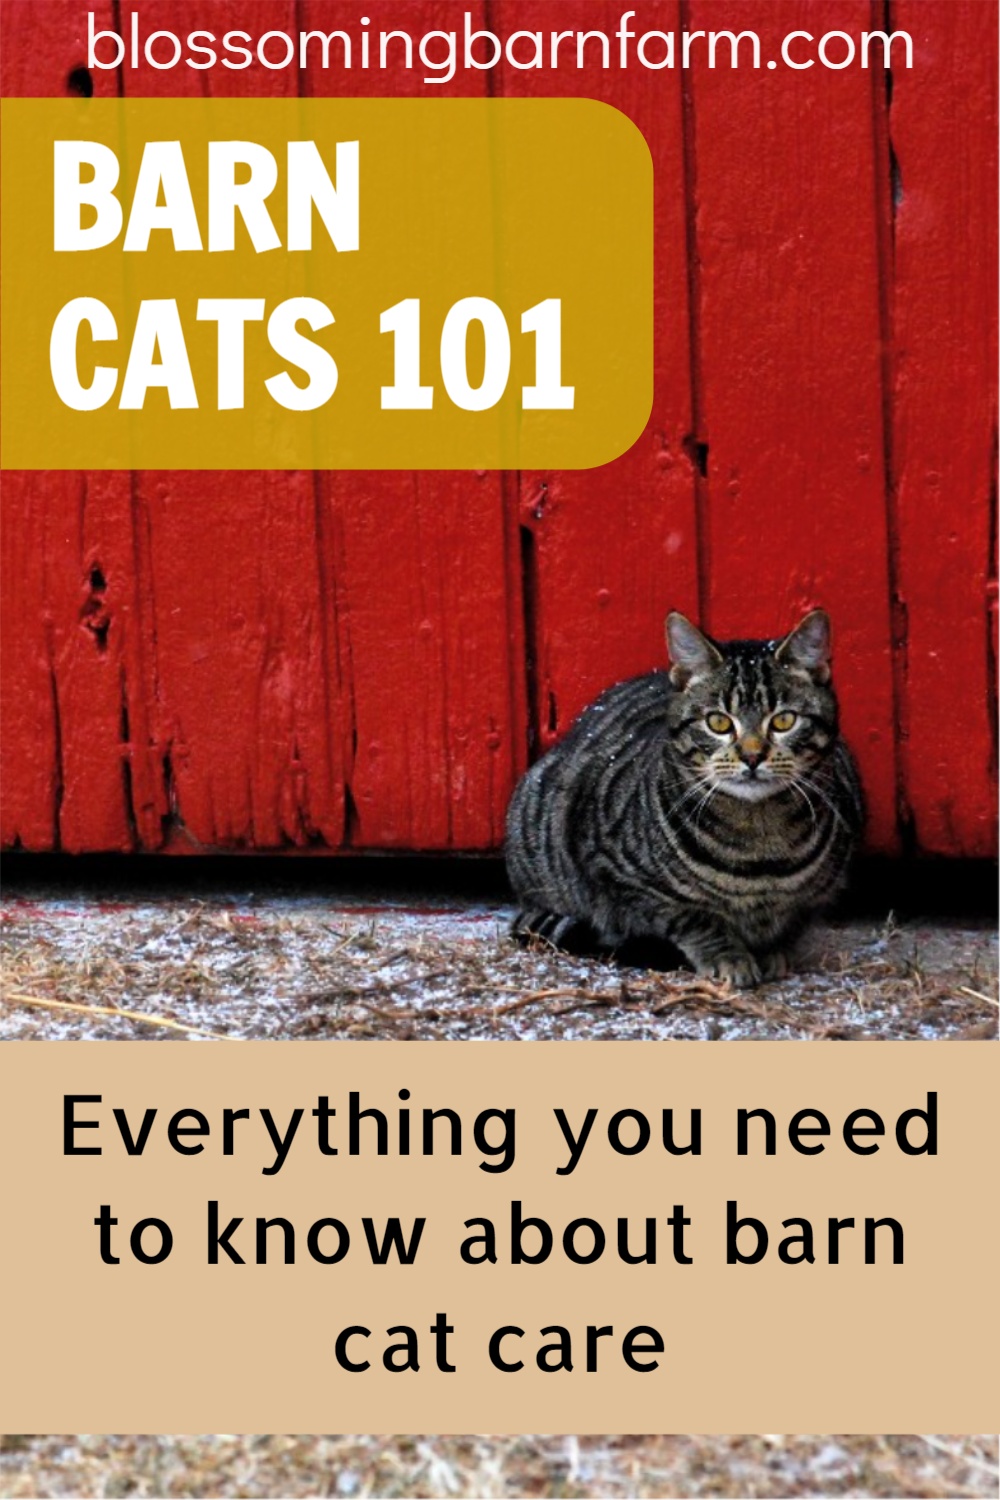 Barn Cats 101: Everything you need to know about barn cat care. Tabby cat in front of barn